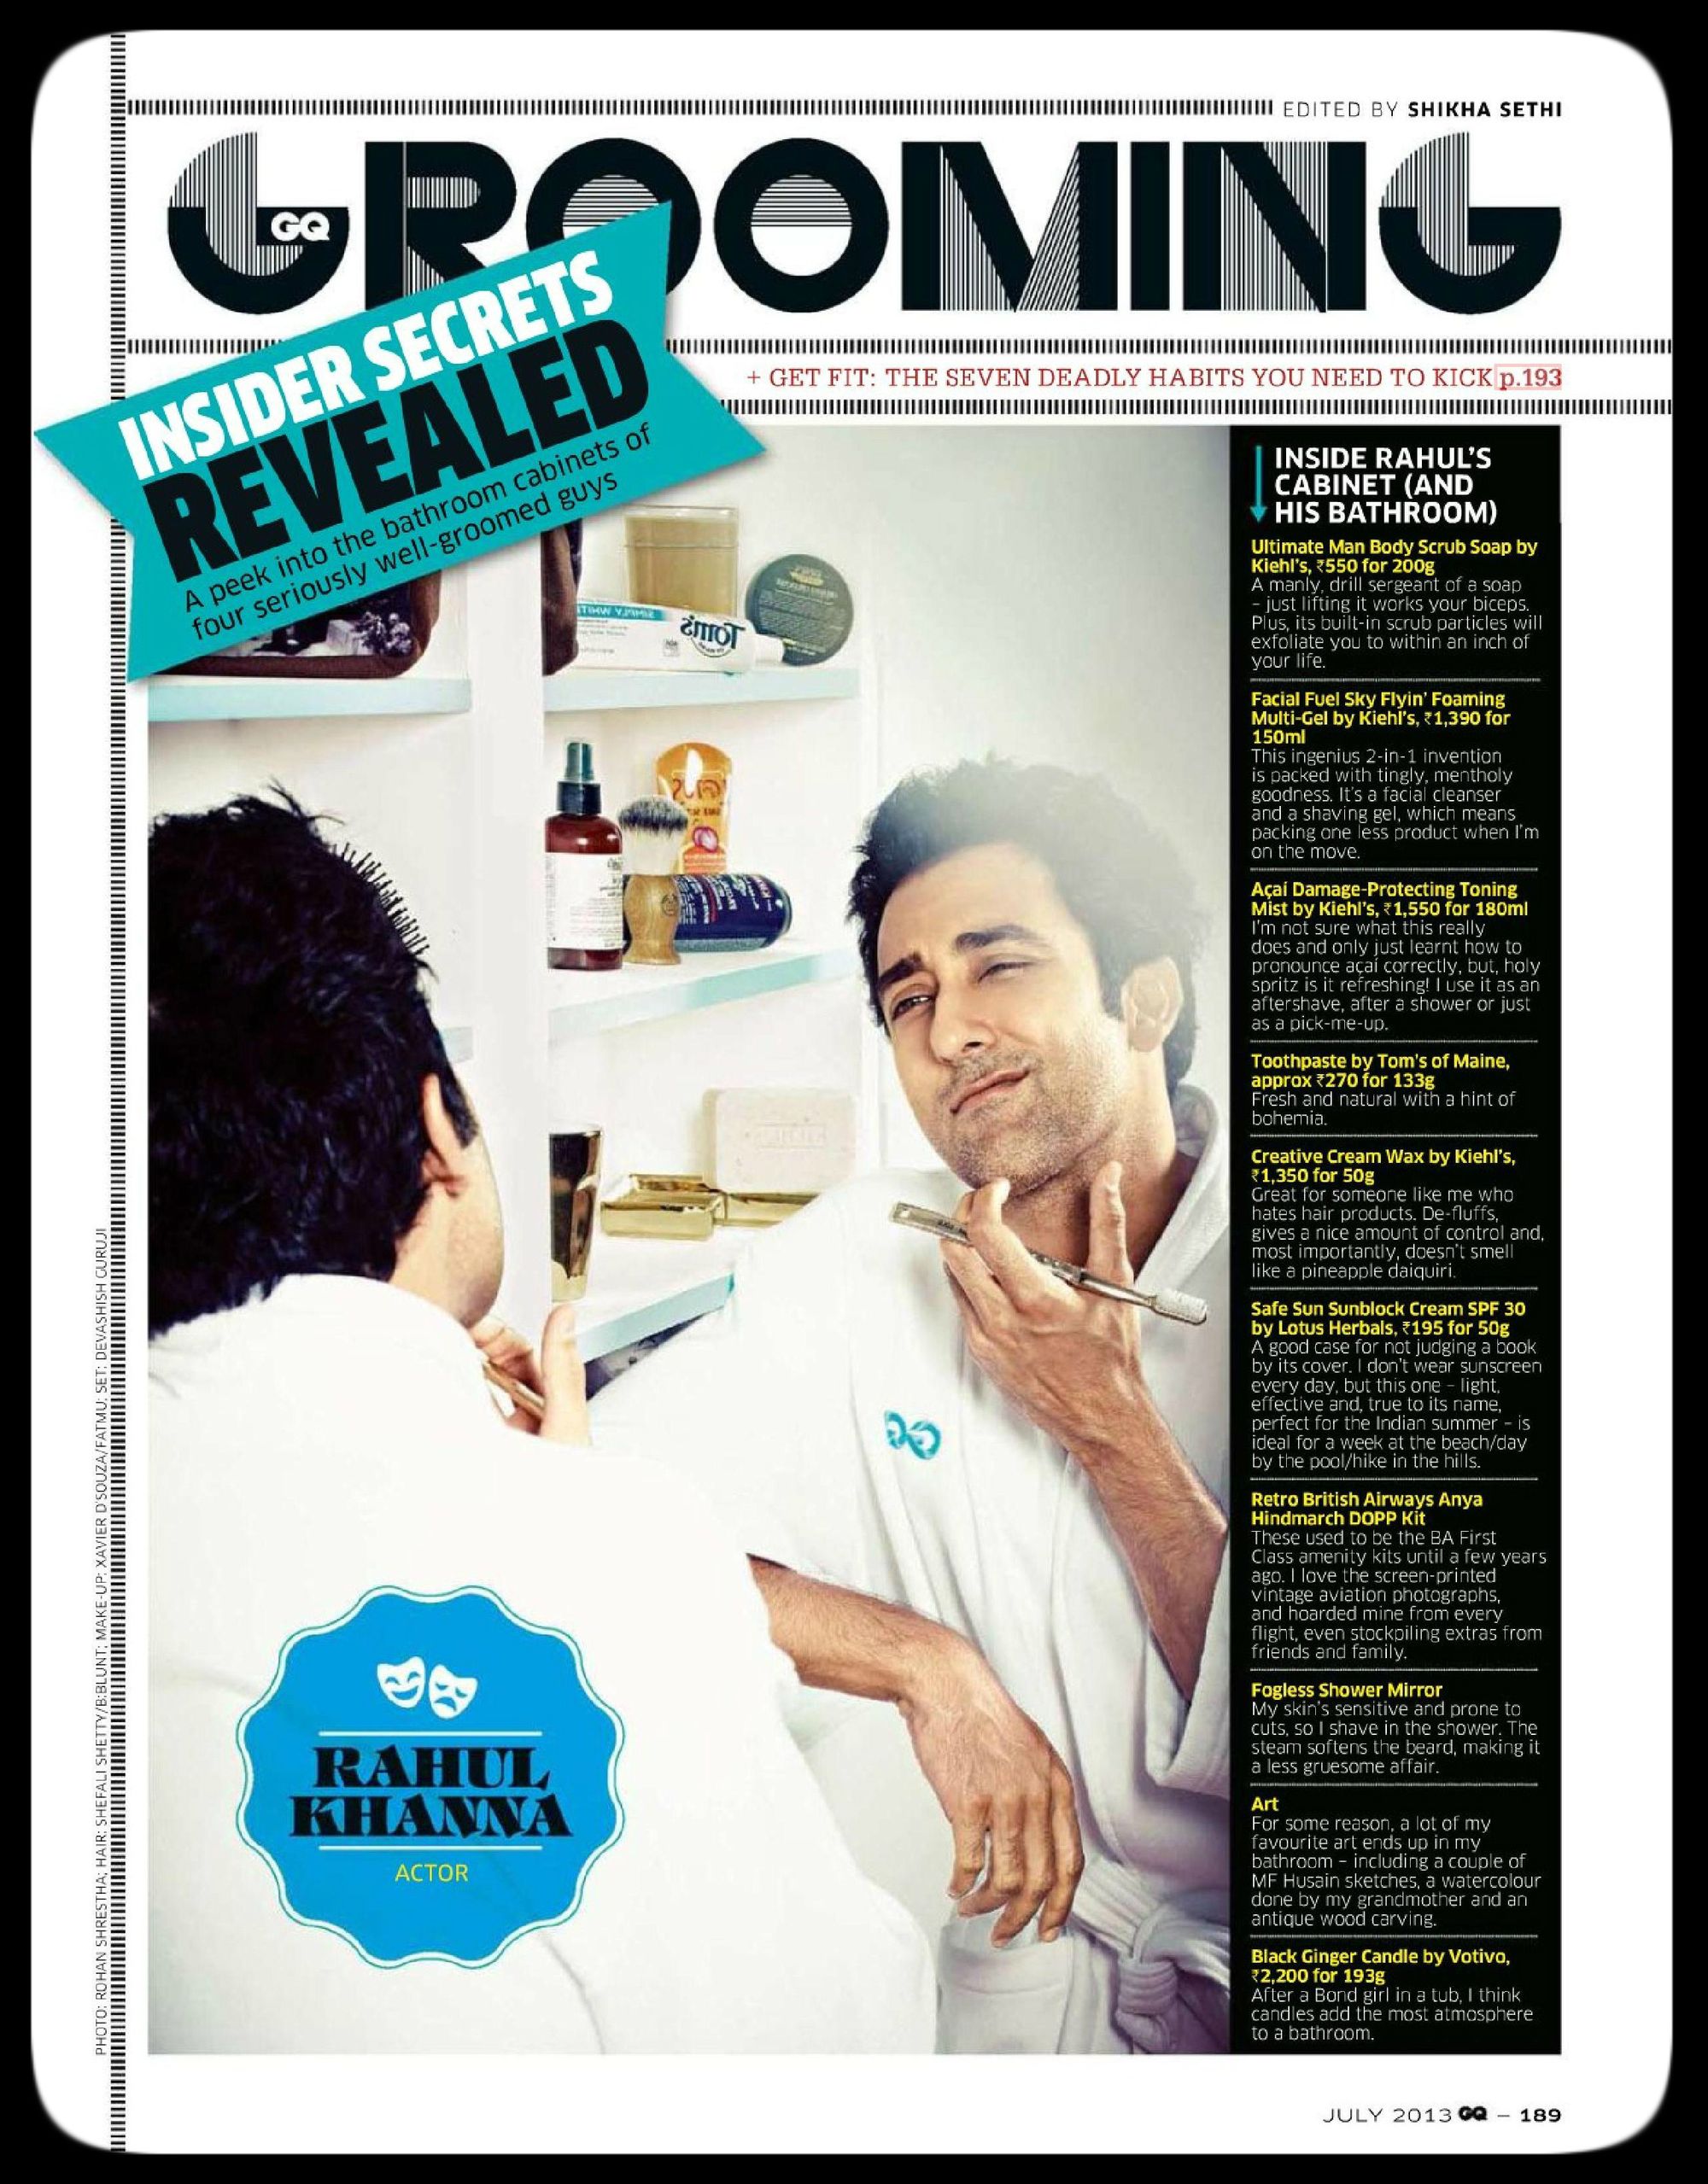 Inside Rahul Khanna's bathroom cabinet, featured in GQ's July 2013 issue